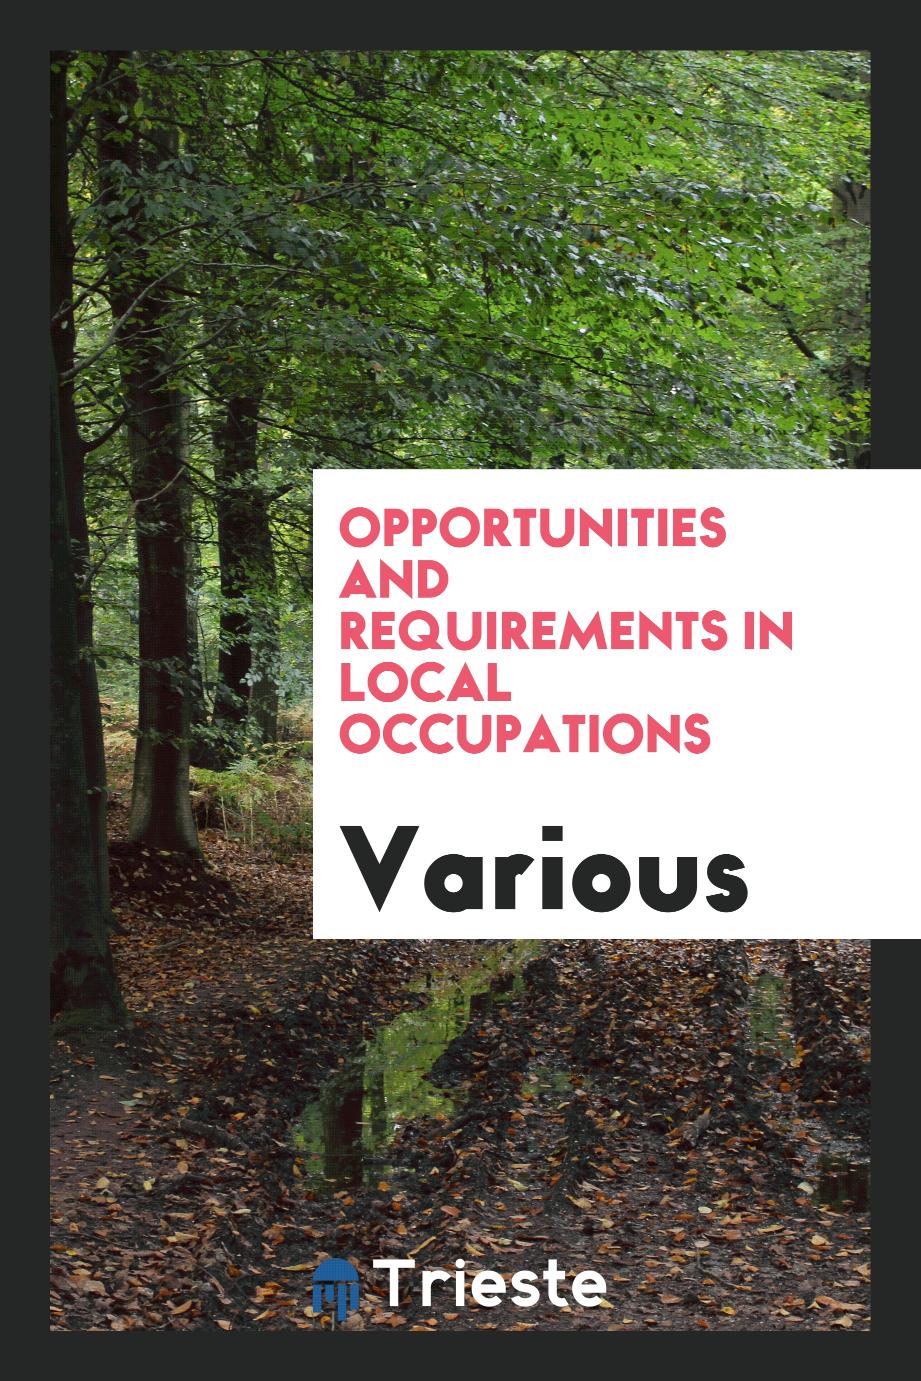 Opportunities and Requirements in Local Occupations